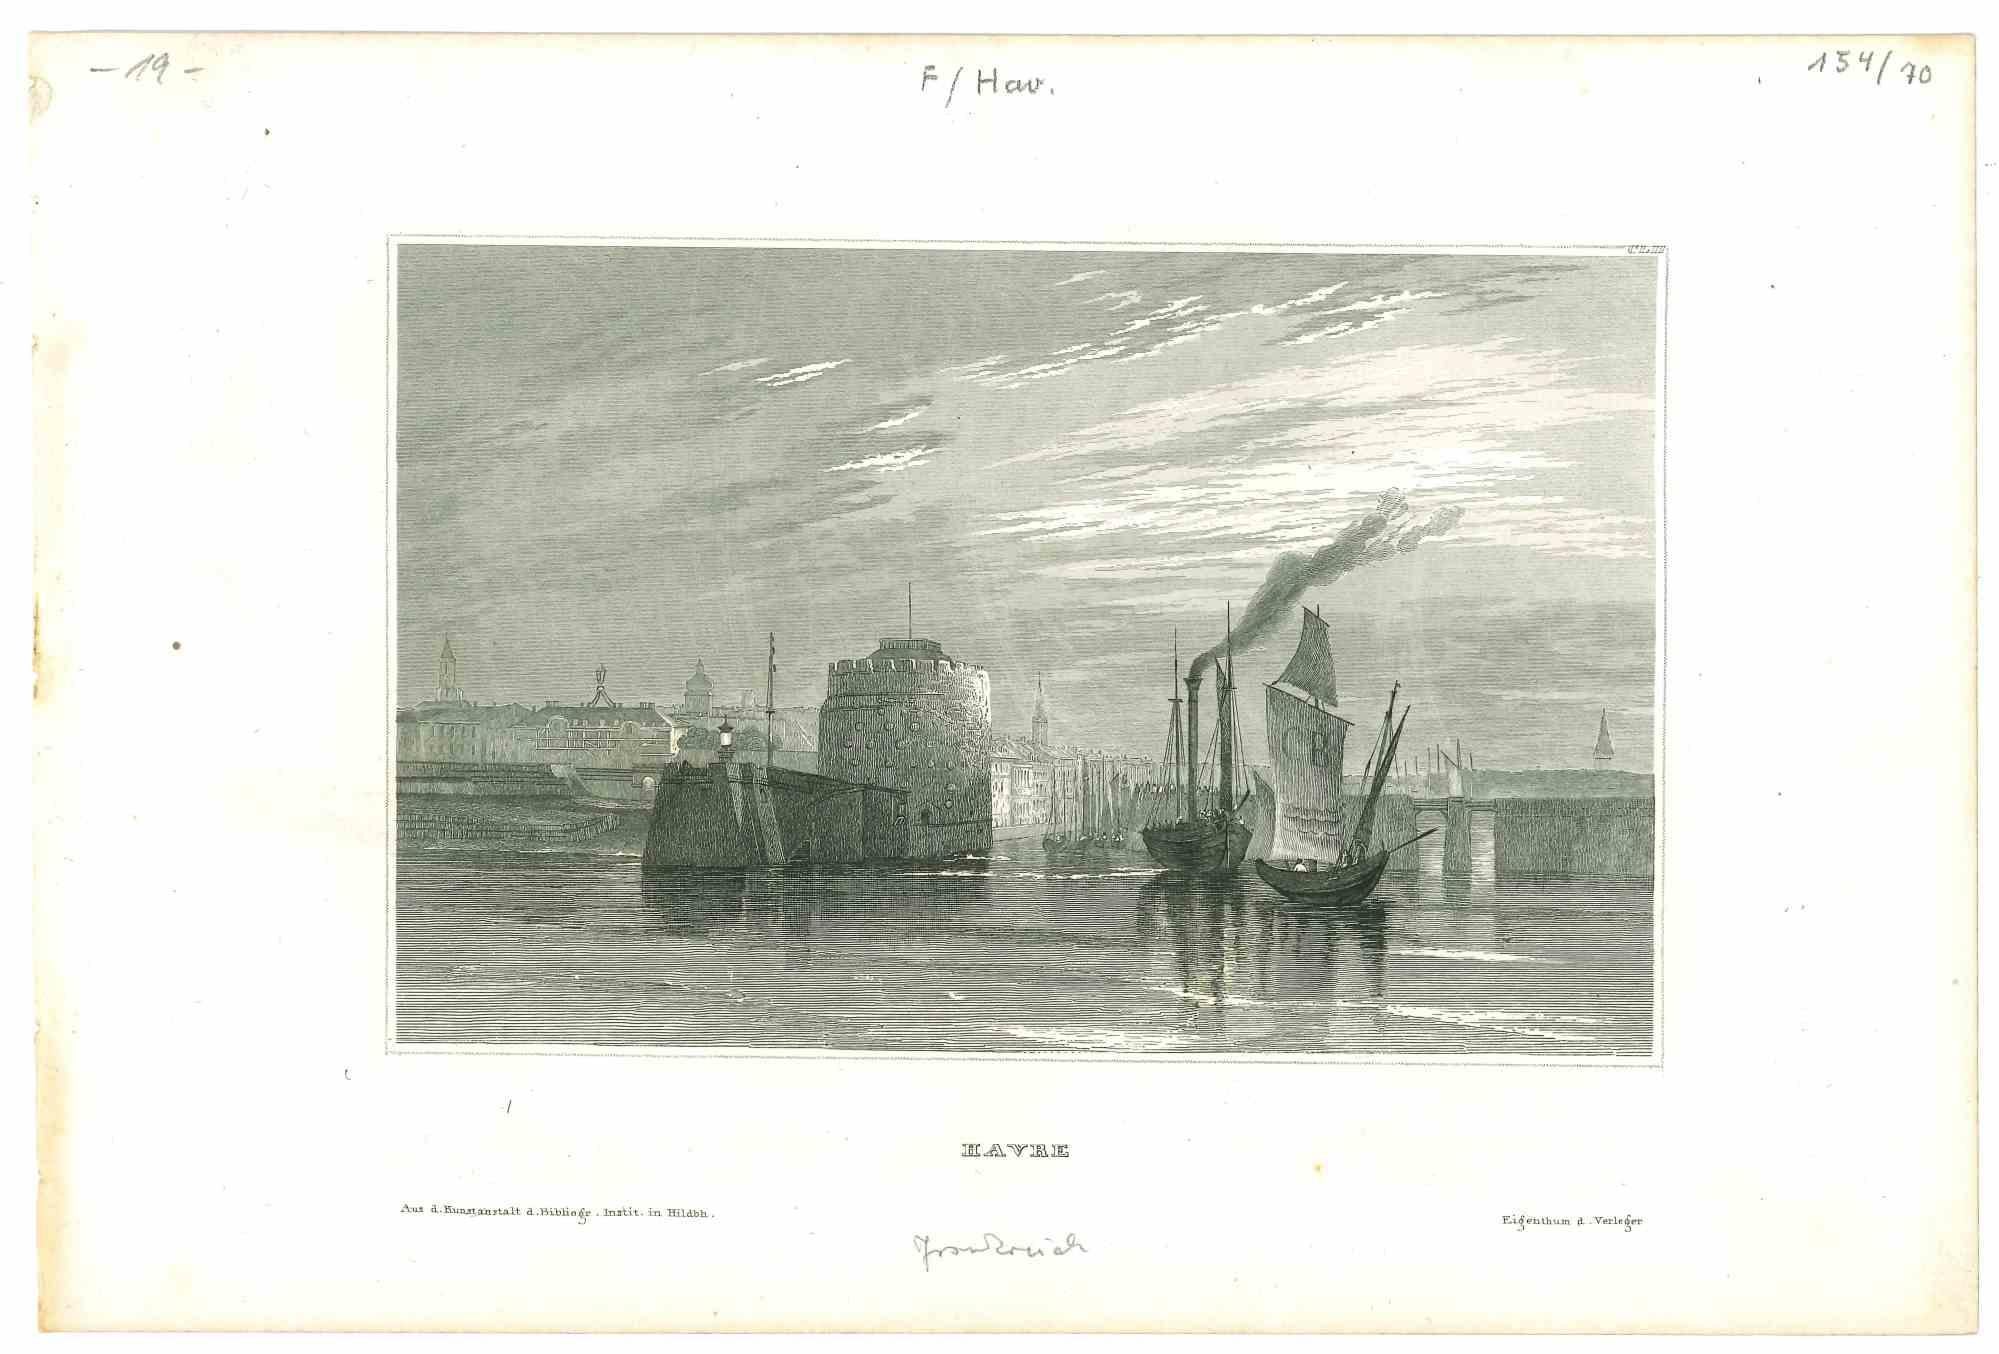 Unknown Landscape Print - Ancient View of Havre - Original Lithograph - Mid-19th Century